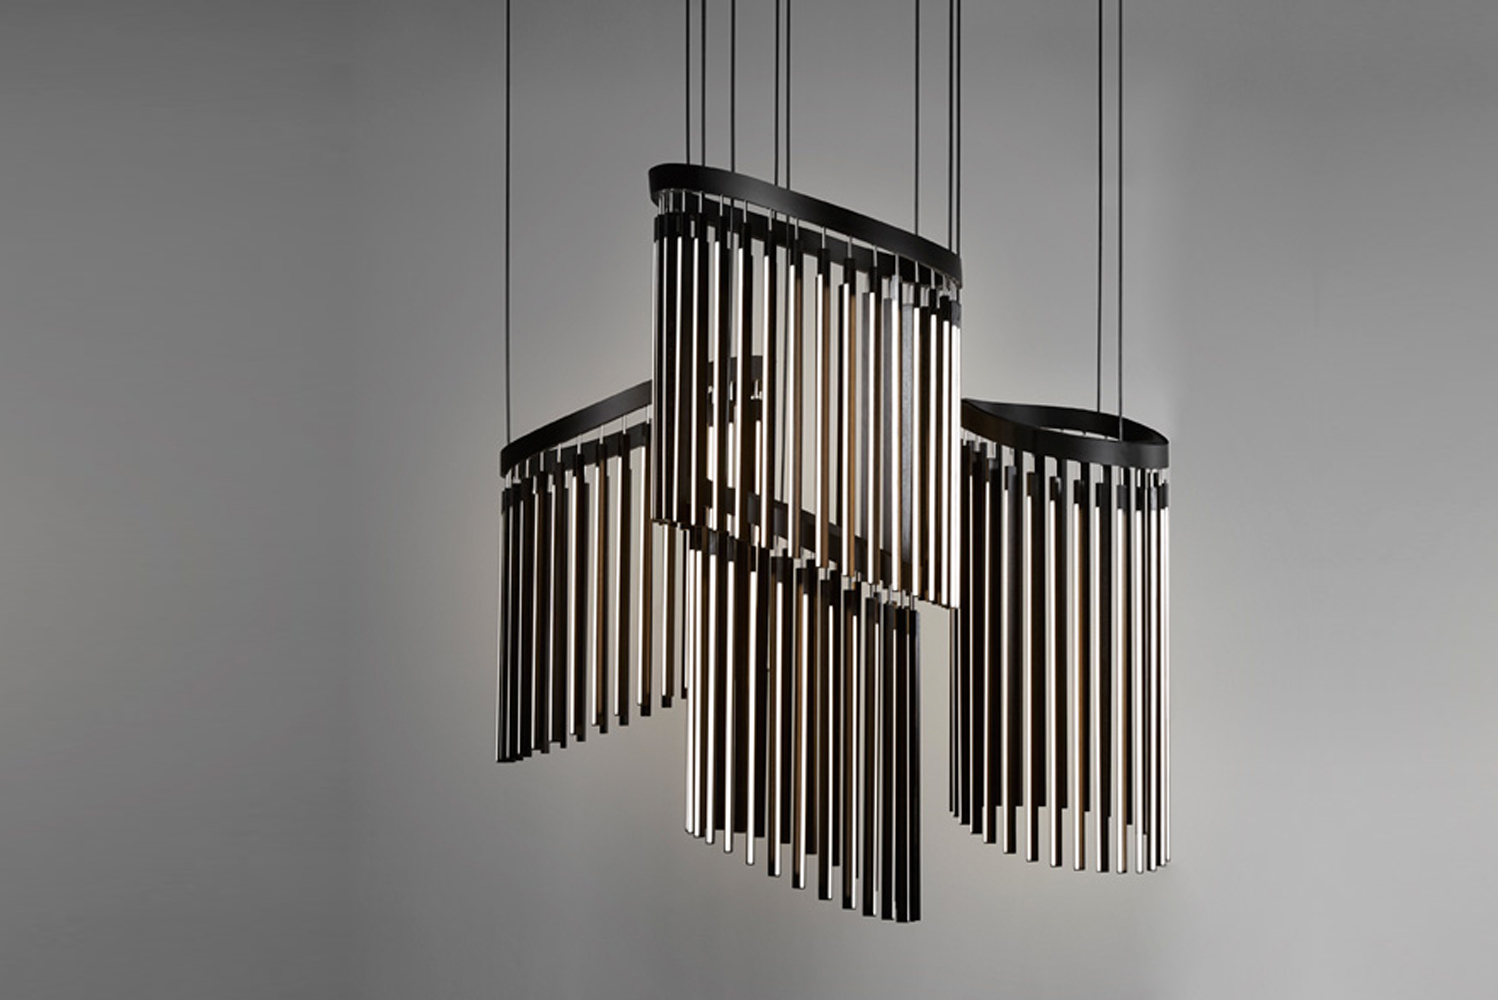 Chime a playful reinterpretation of a classic chandelier is a 10-foot-tall cascading arrangement made out of reclaimed redw